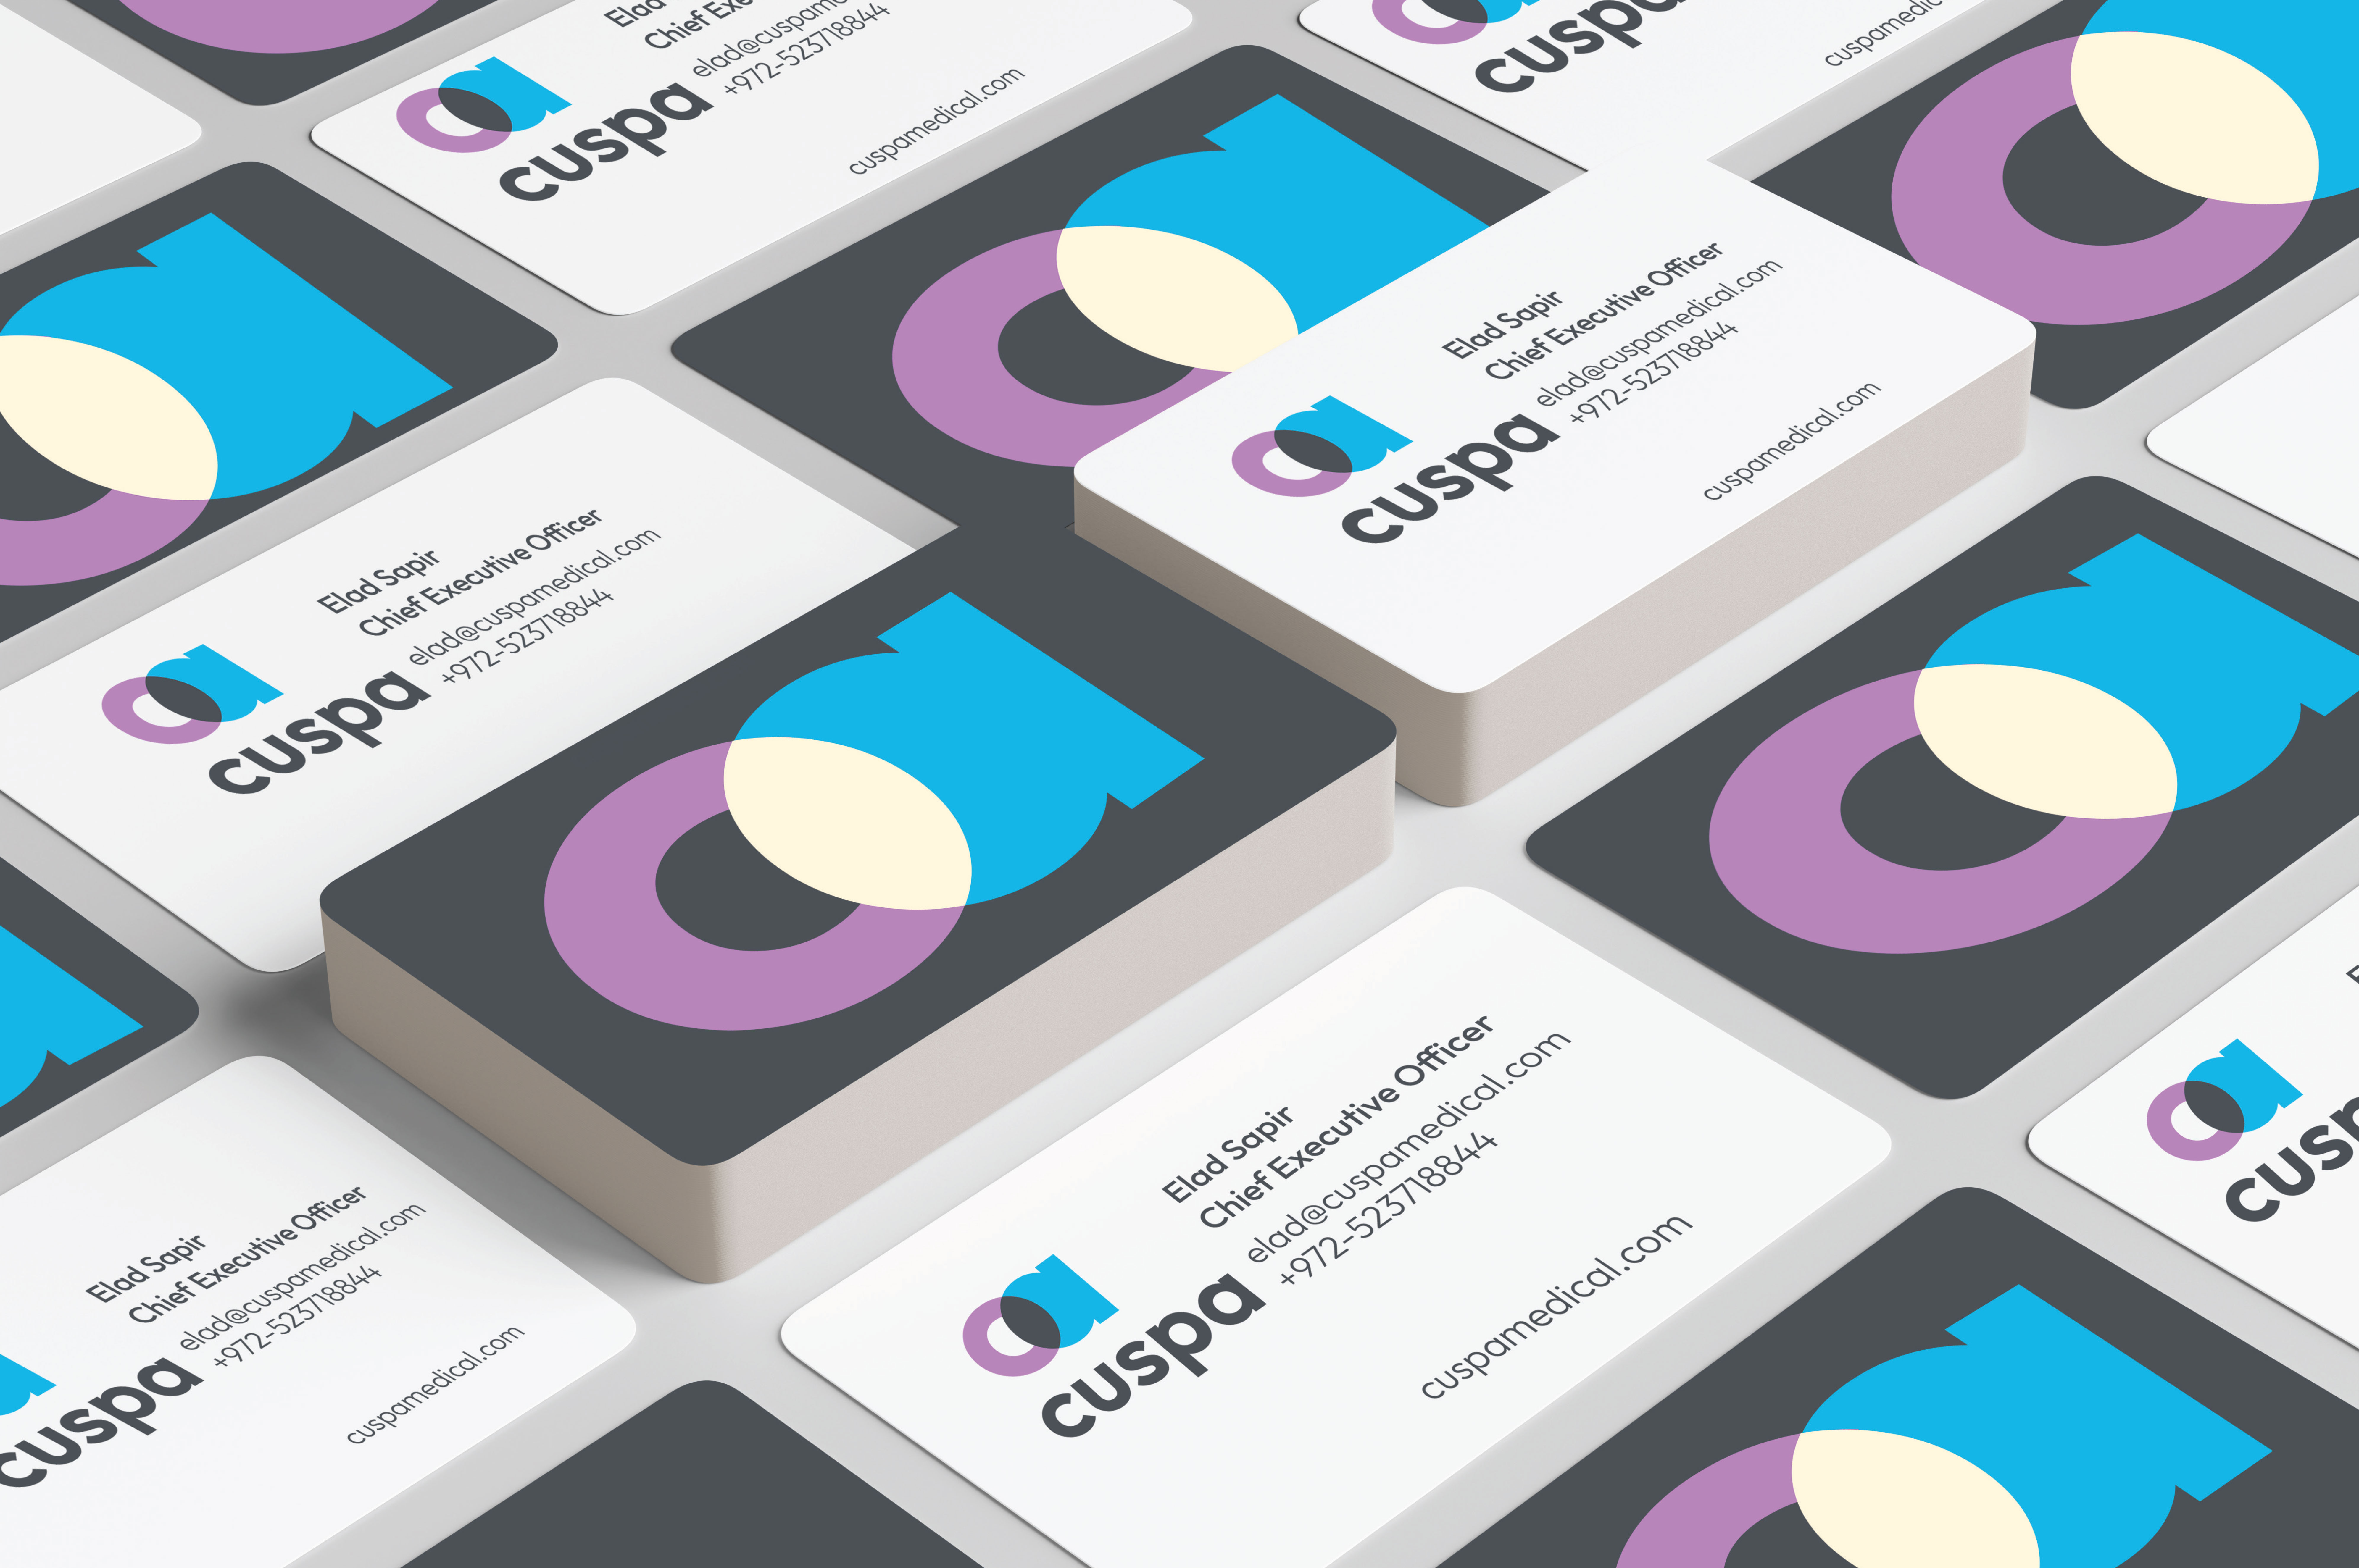 Branding-identity-Letterhead-Cuspa-medical-NotFromHere